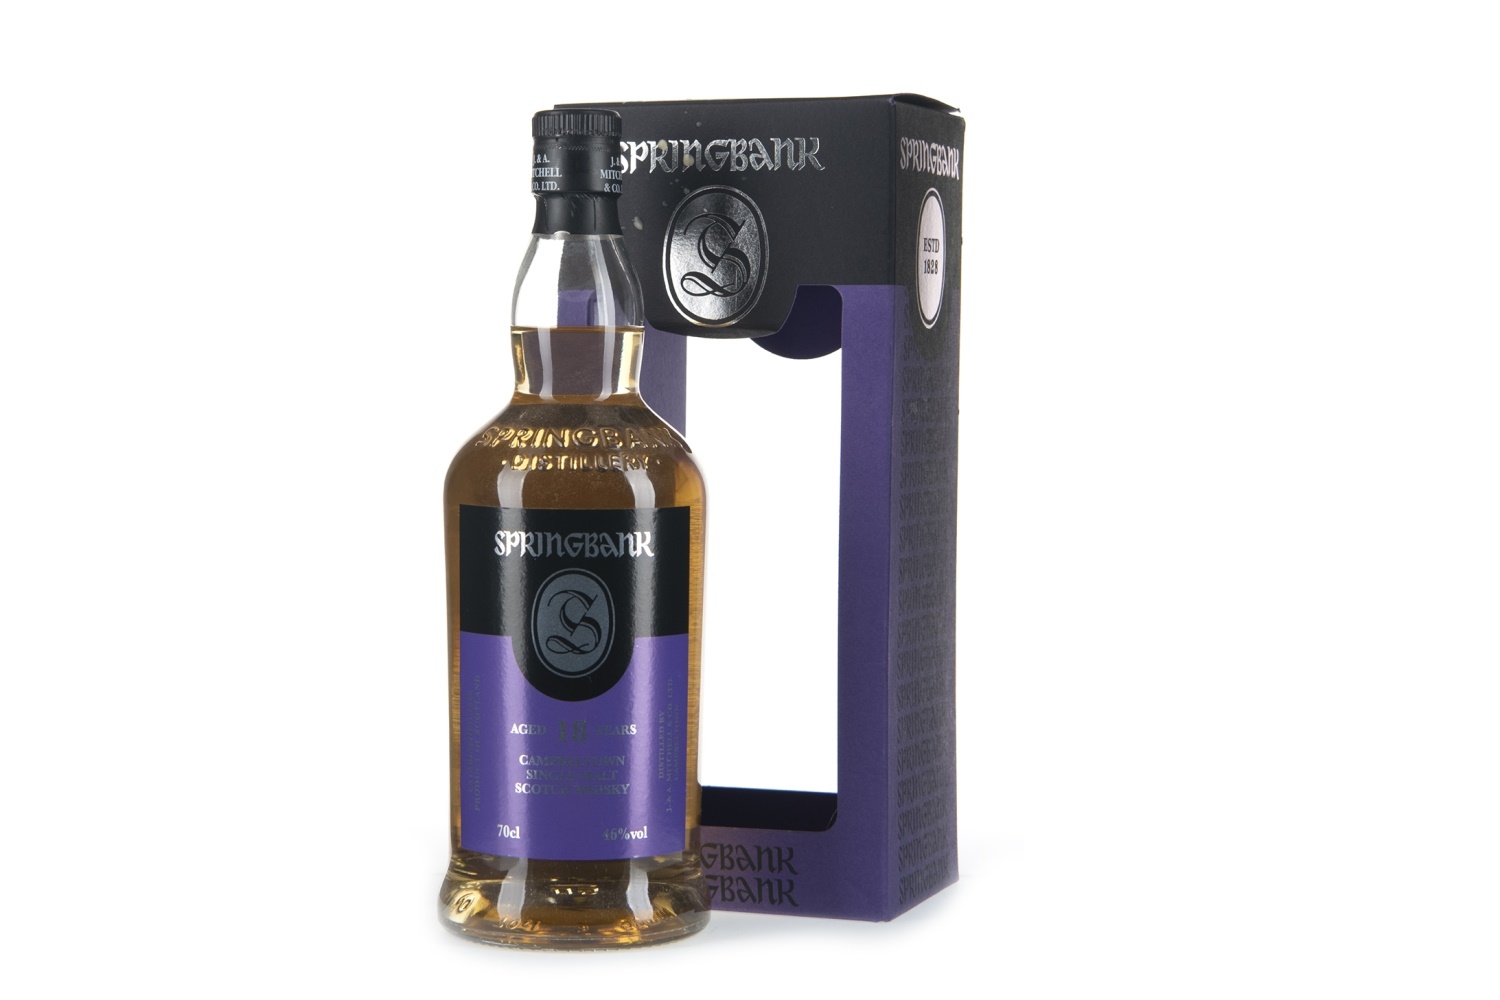 SPRINGBANK AGED 18 YEARS 2018 RELEASE - Image 2 of 2